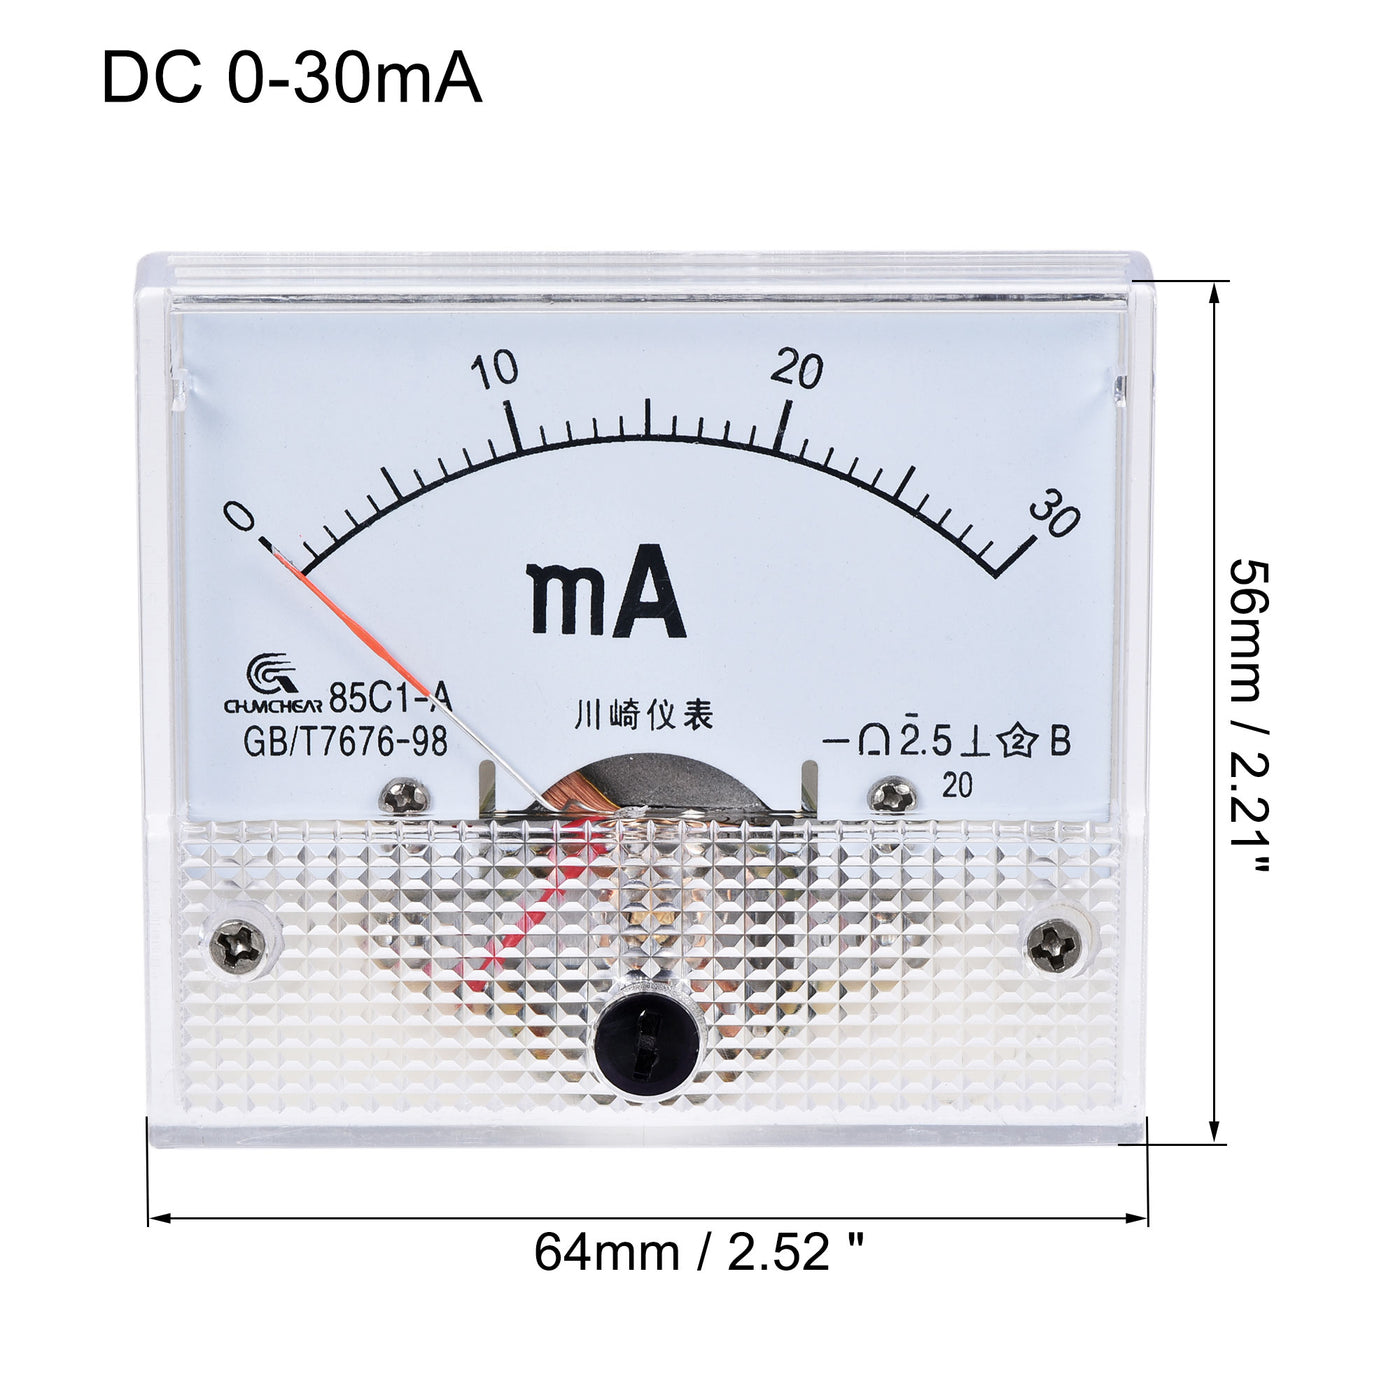 uxcell Uxcell Analog Current Panel Meter, DC 0-30mA Class 2.5 Ammeter Ampere Tester Gauge for Circuit Testing, White